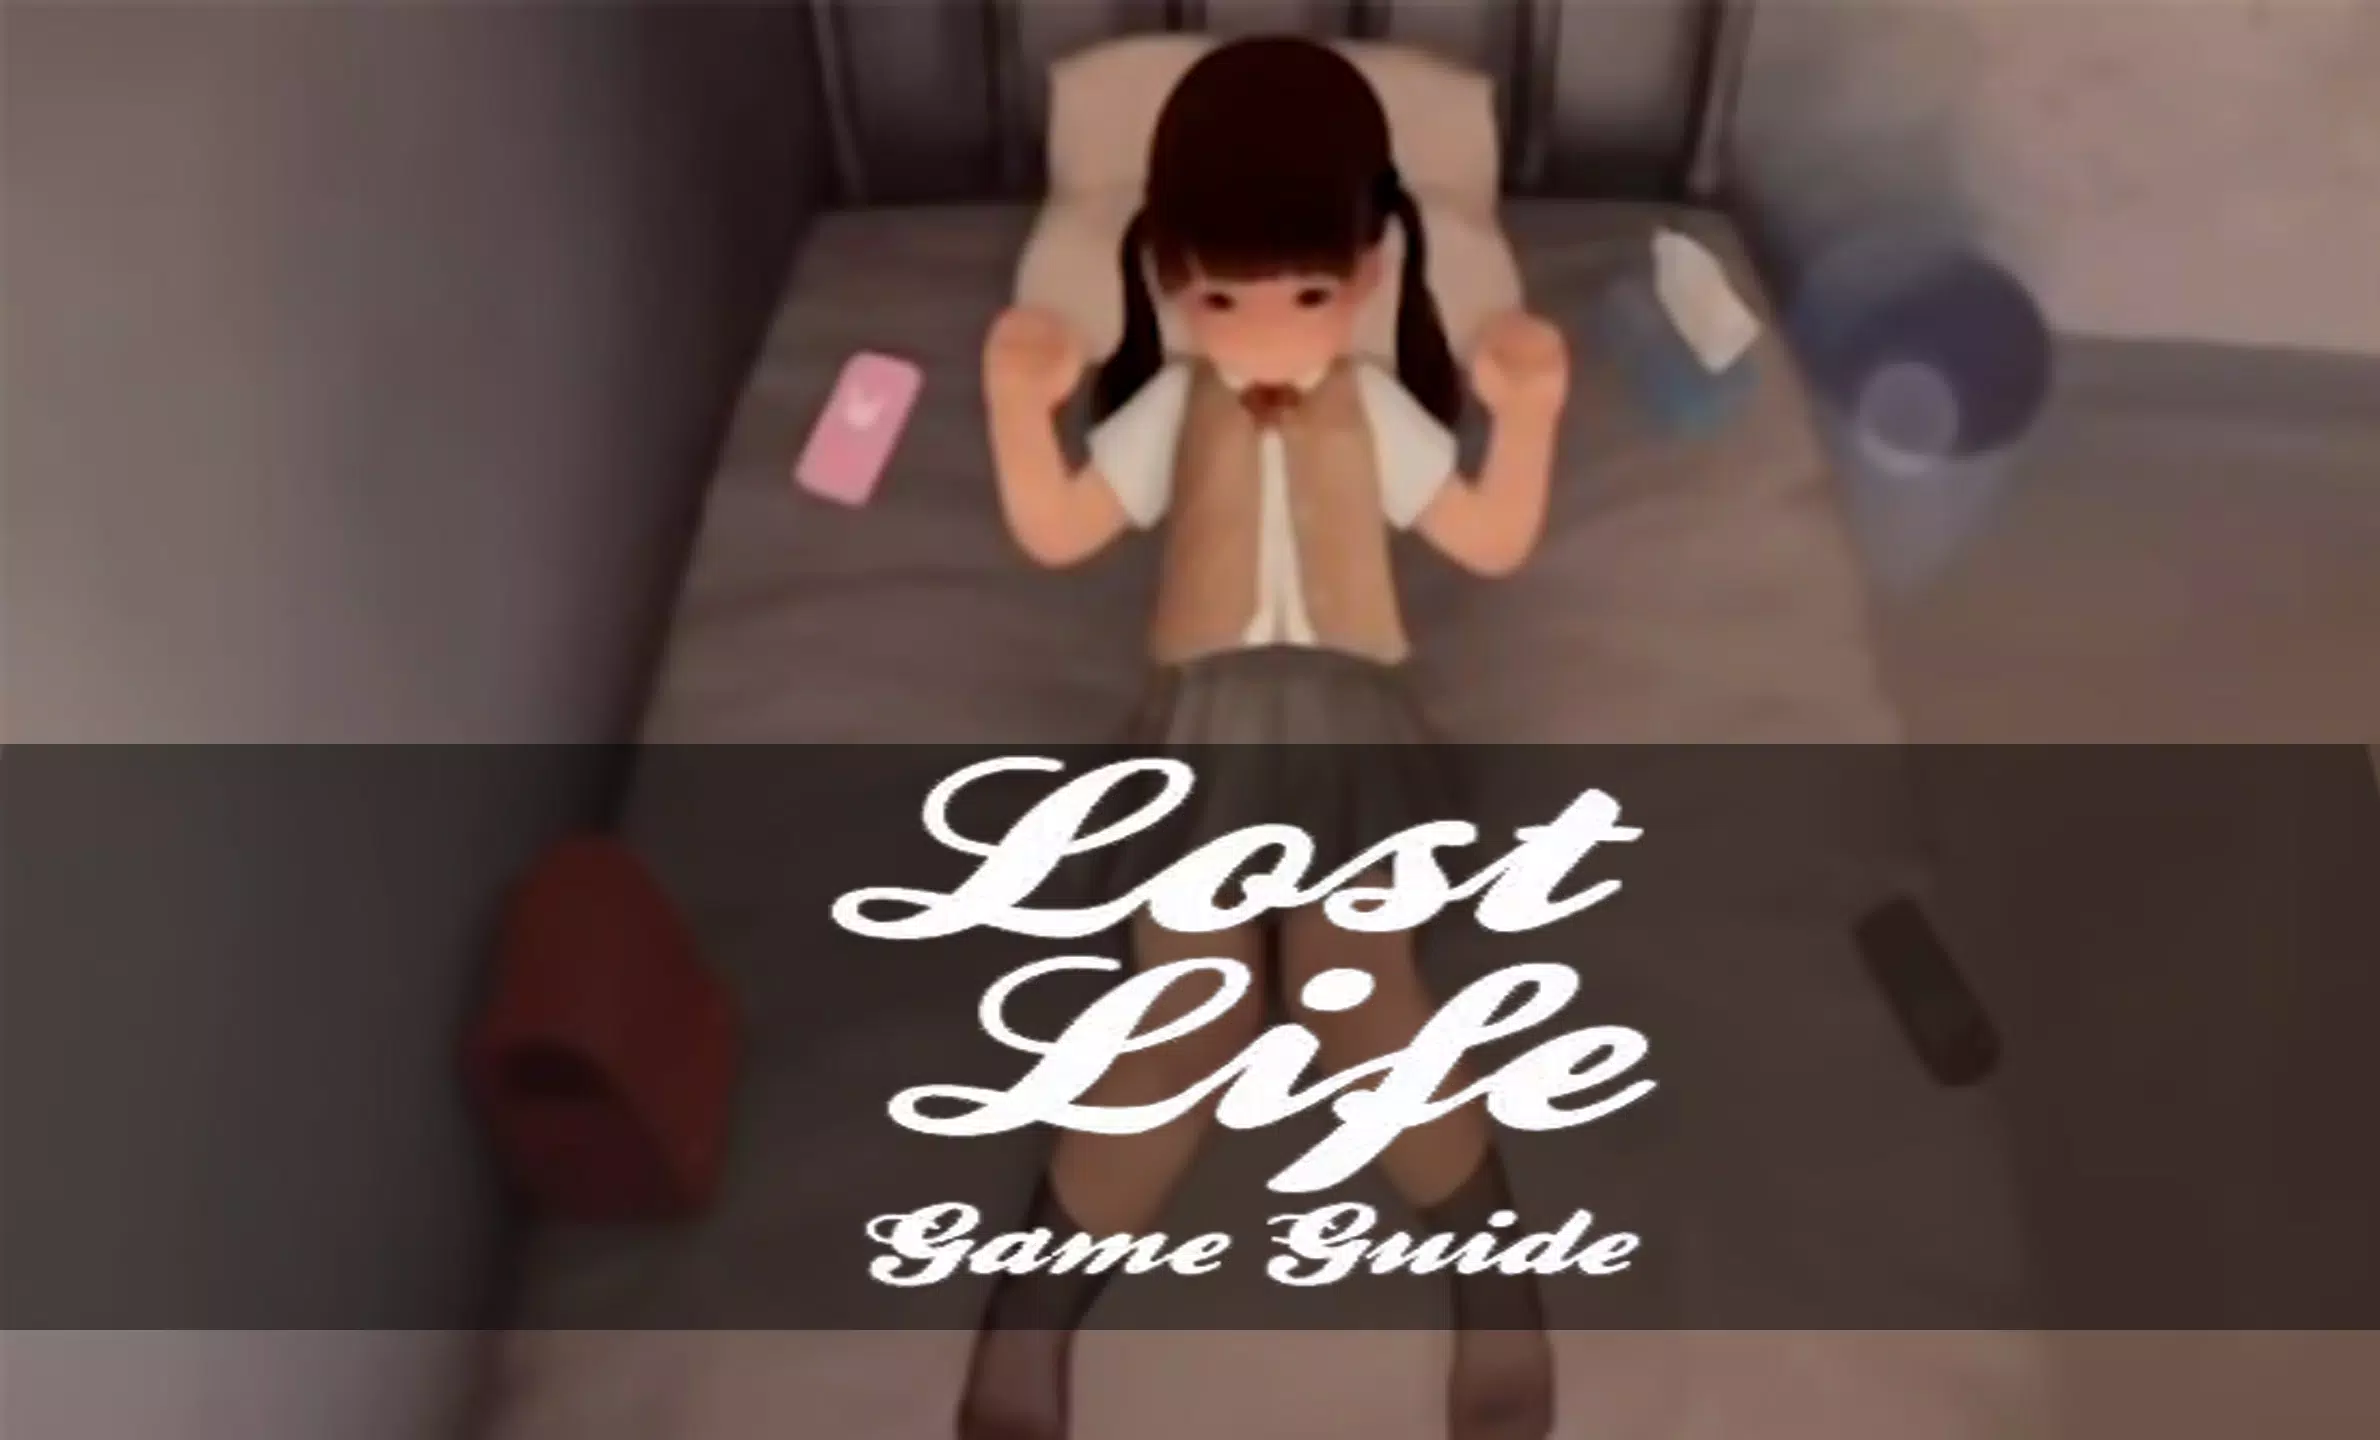 Lost Life Game Guide APK for Android Download